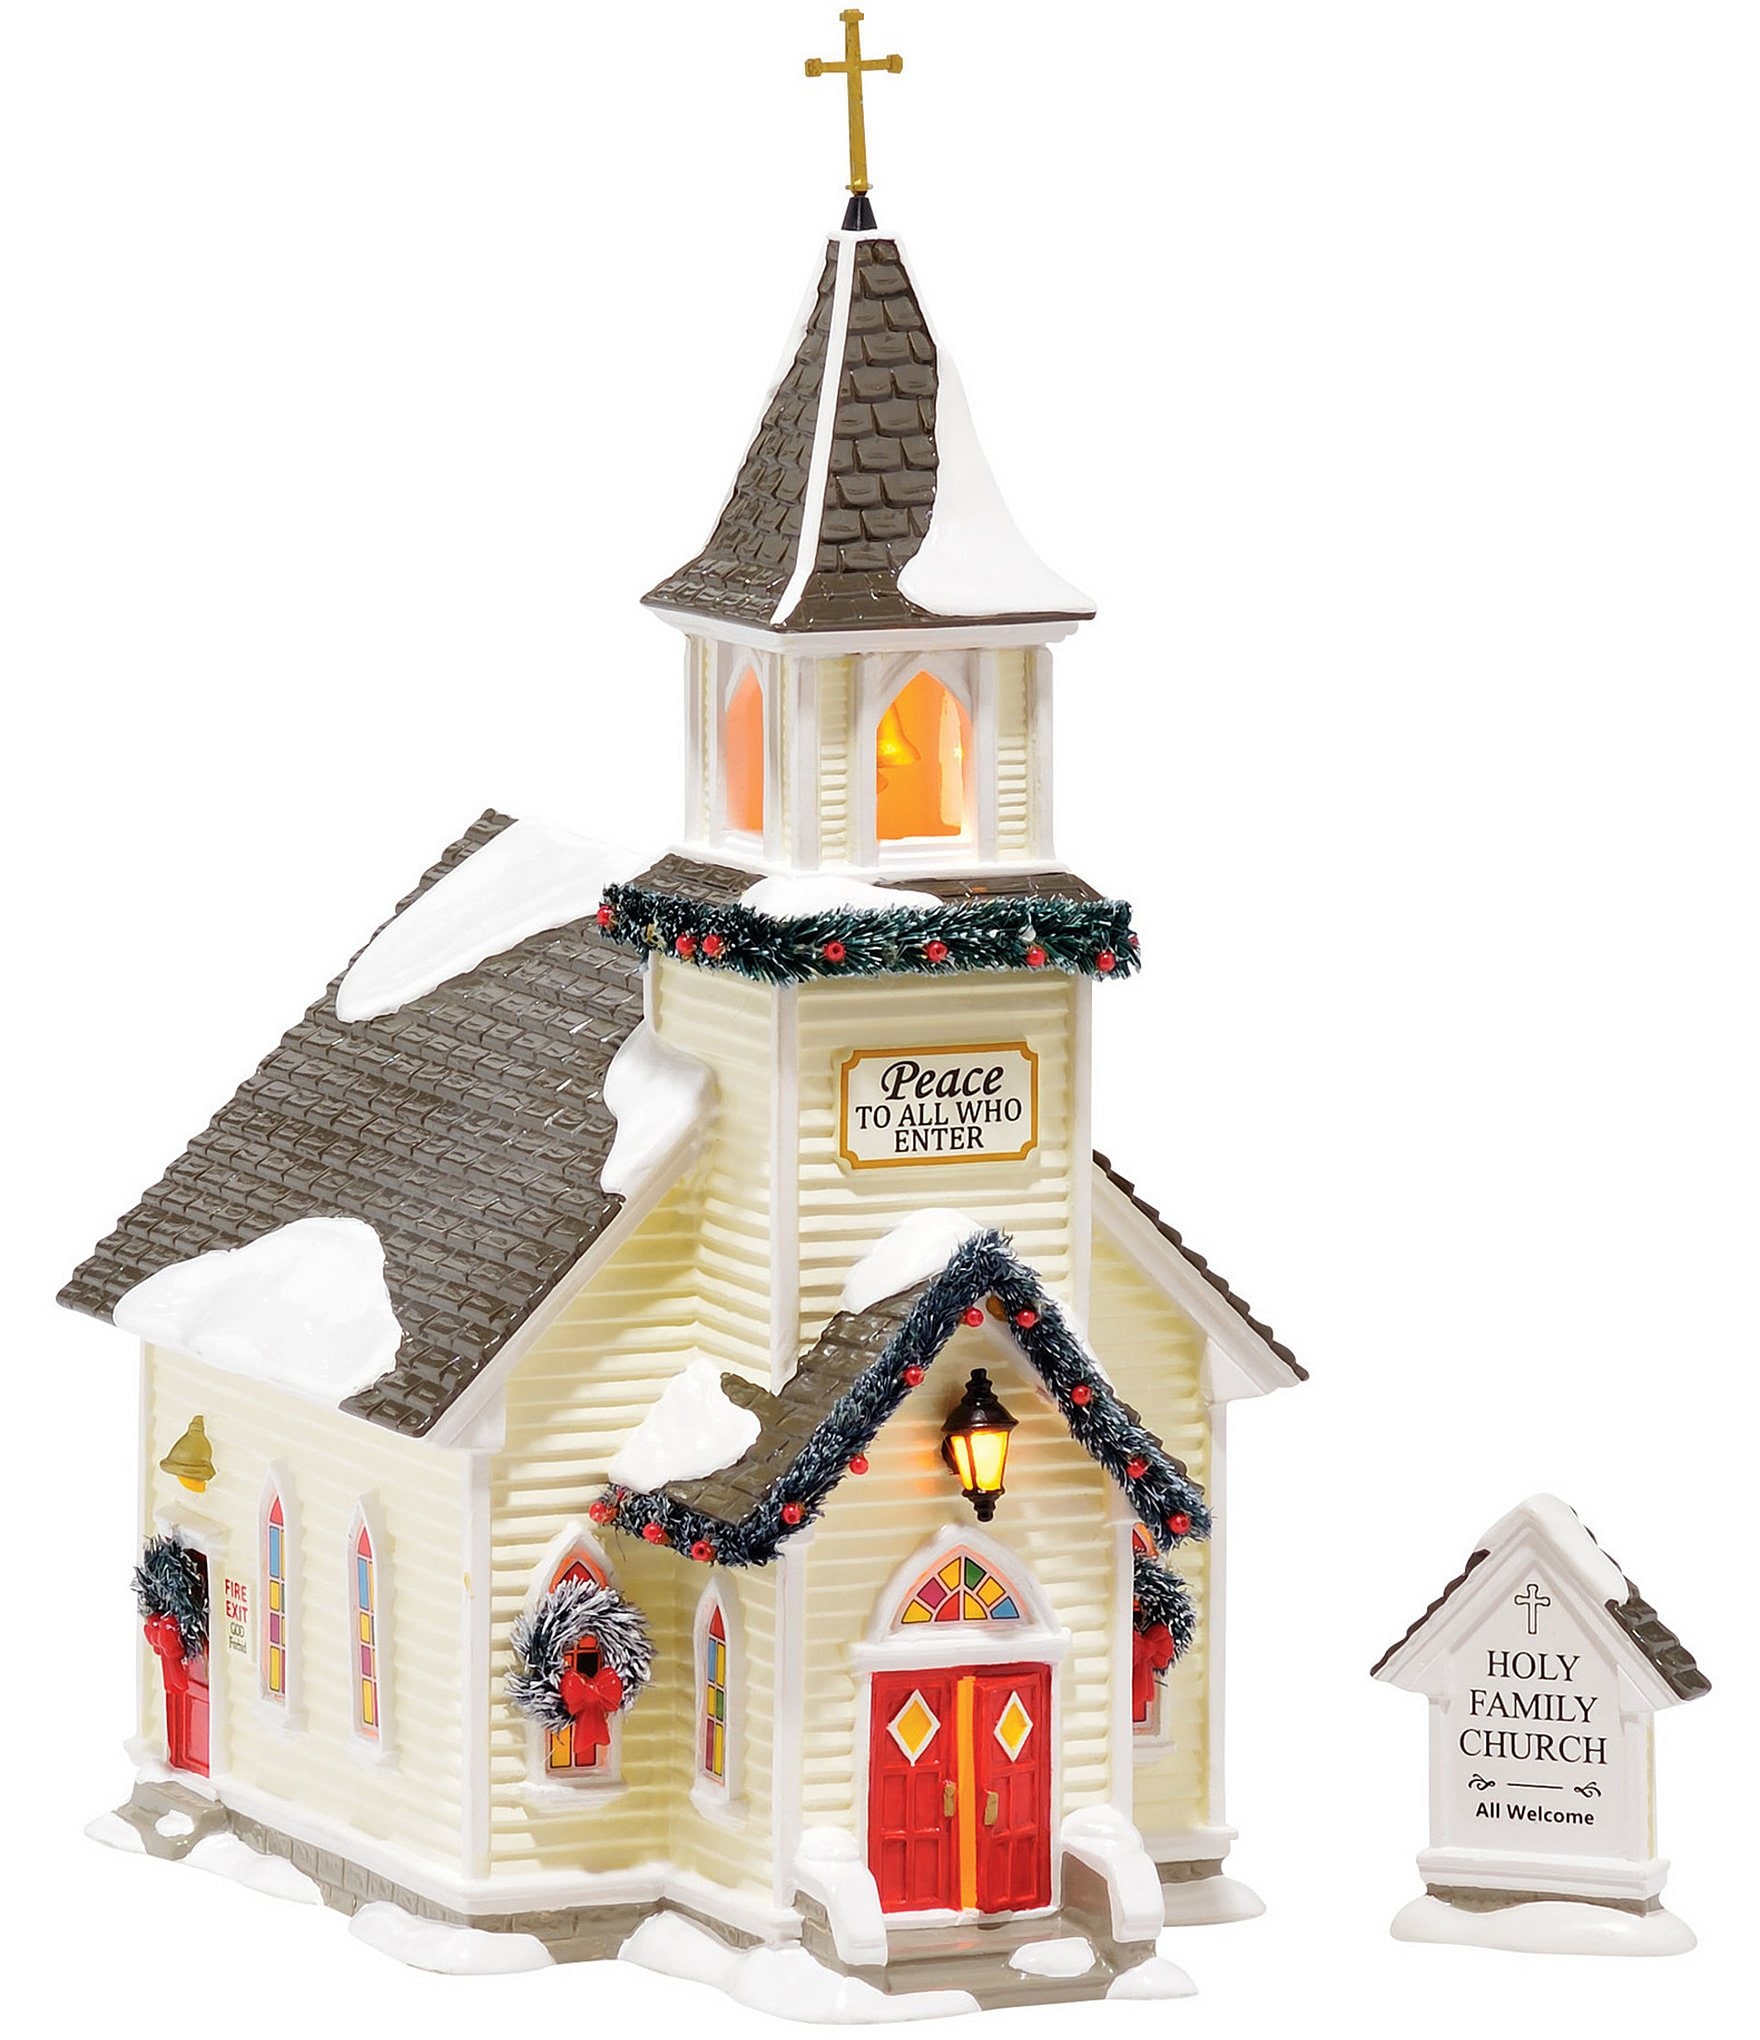 Department 56 Original Snow Village Collection Holy Family Church Figurine,  Set of 2